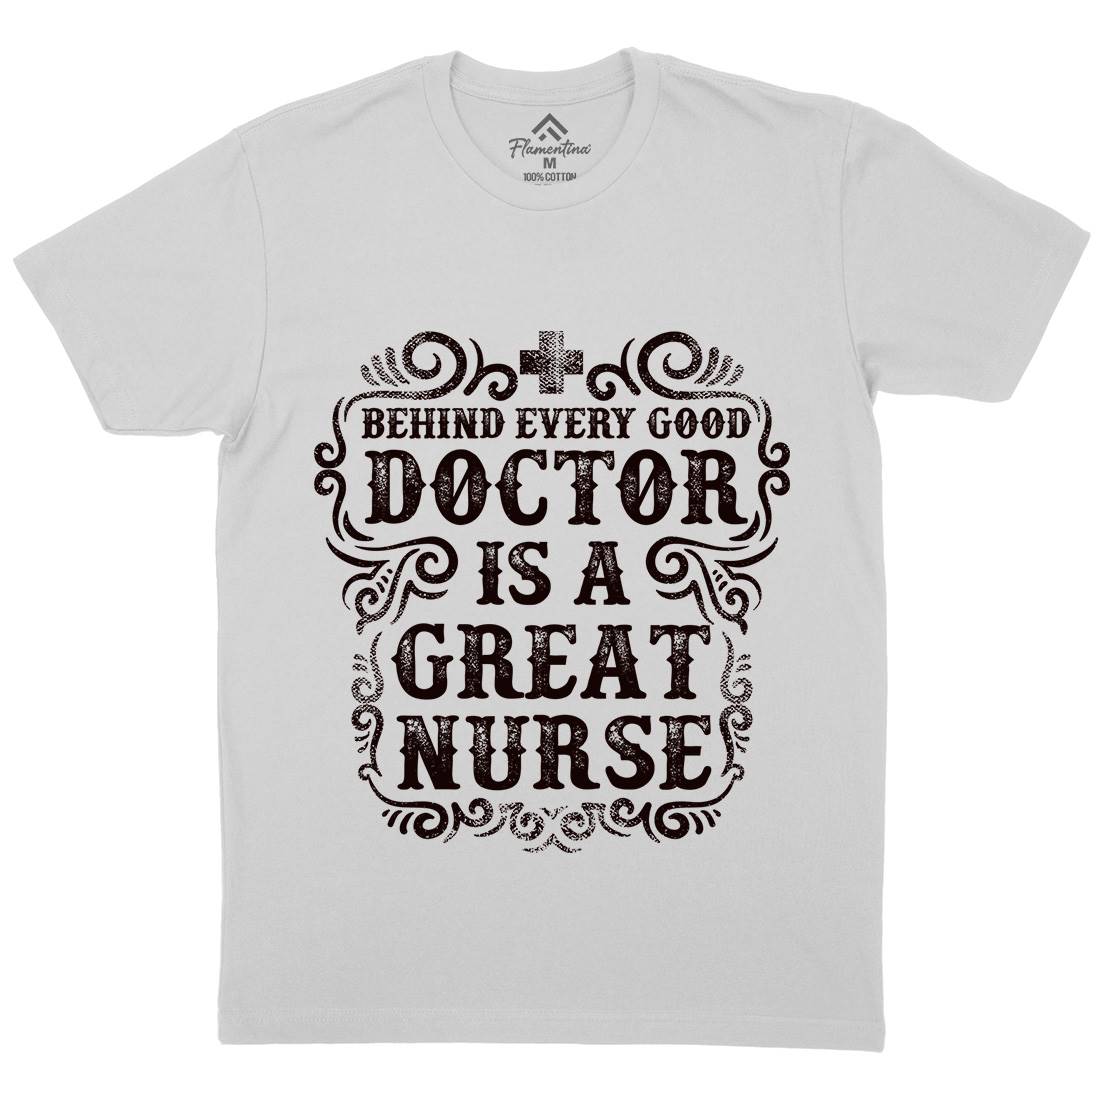 Behind Every Good Doctor Is A Great Nurse Mens Crew Neck T-Shirt Work C910